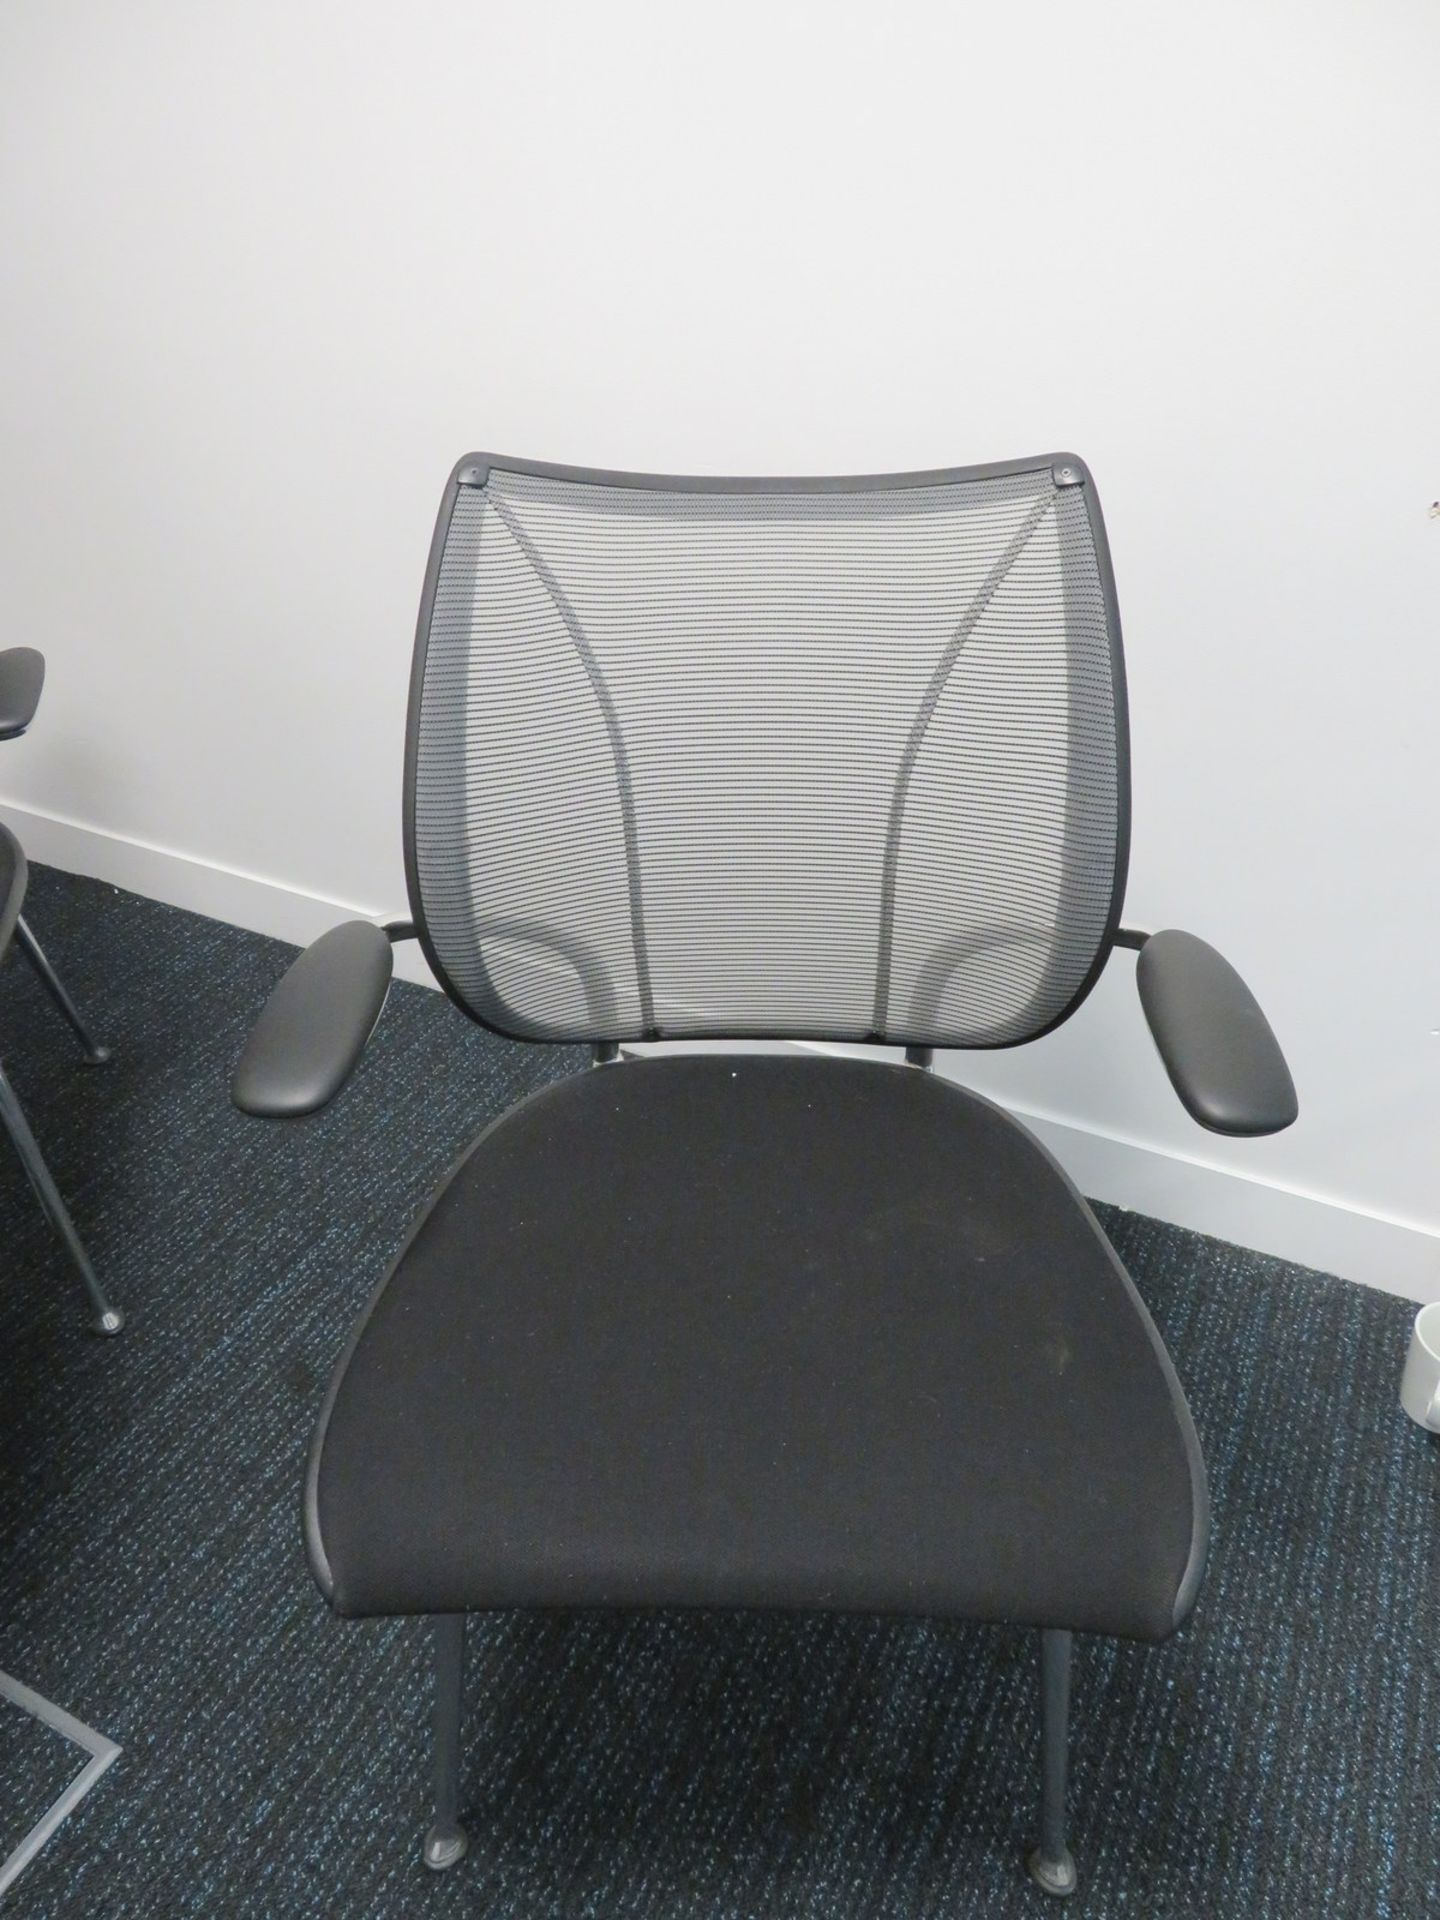 Meeting Room To Include Round Table And 5 Office Chairs. - Image 2 of 3